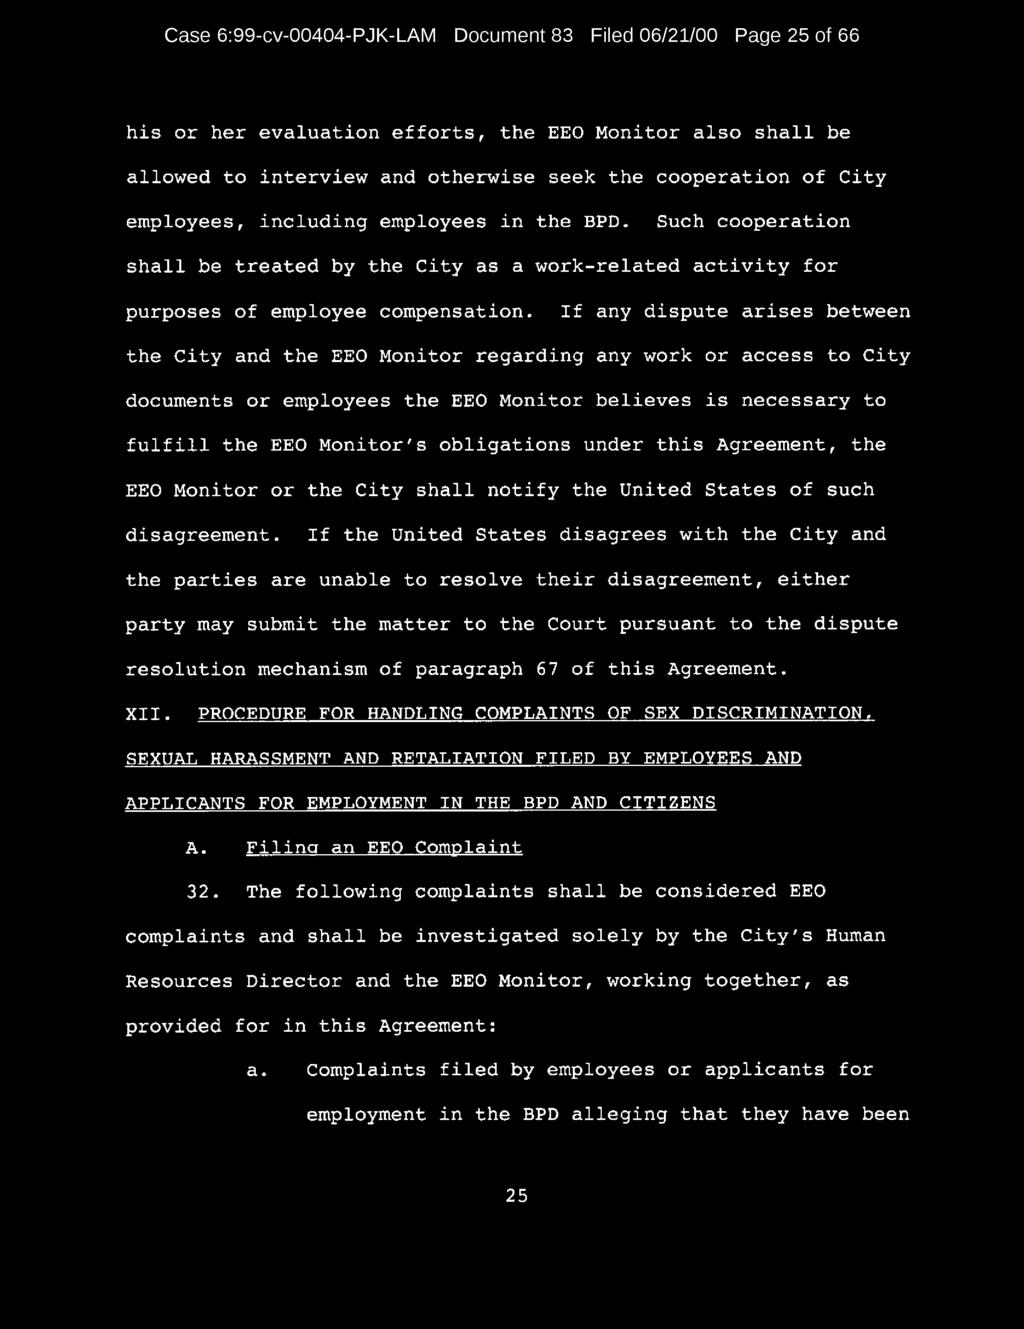 Case 6:99-cv-00404-PJK-LAM Document 83 Filed 06/21/00 Page 25 of 66 his or her evaluation efforts, the EEO Monitor also shall be allowed to interview and otherwise seek the cooperation of City